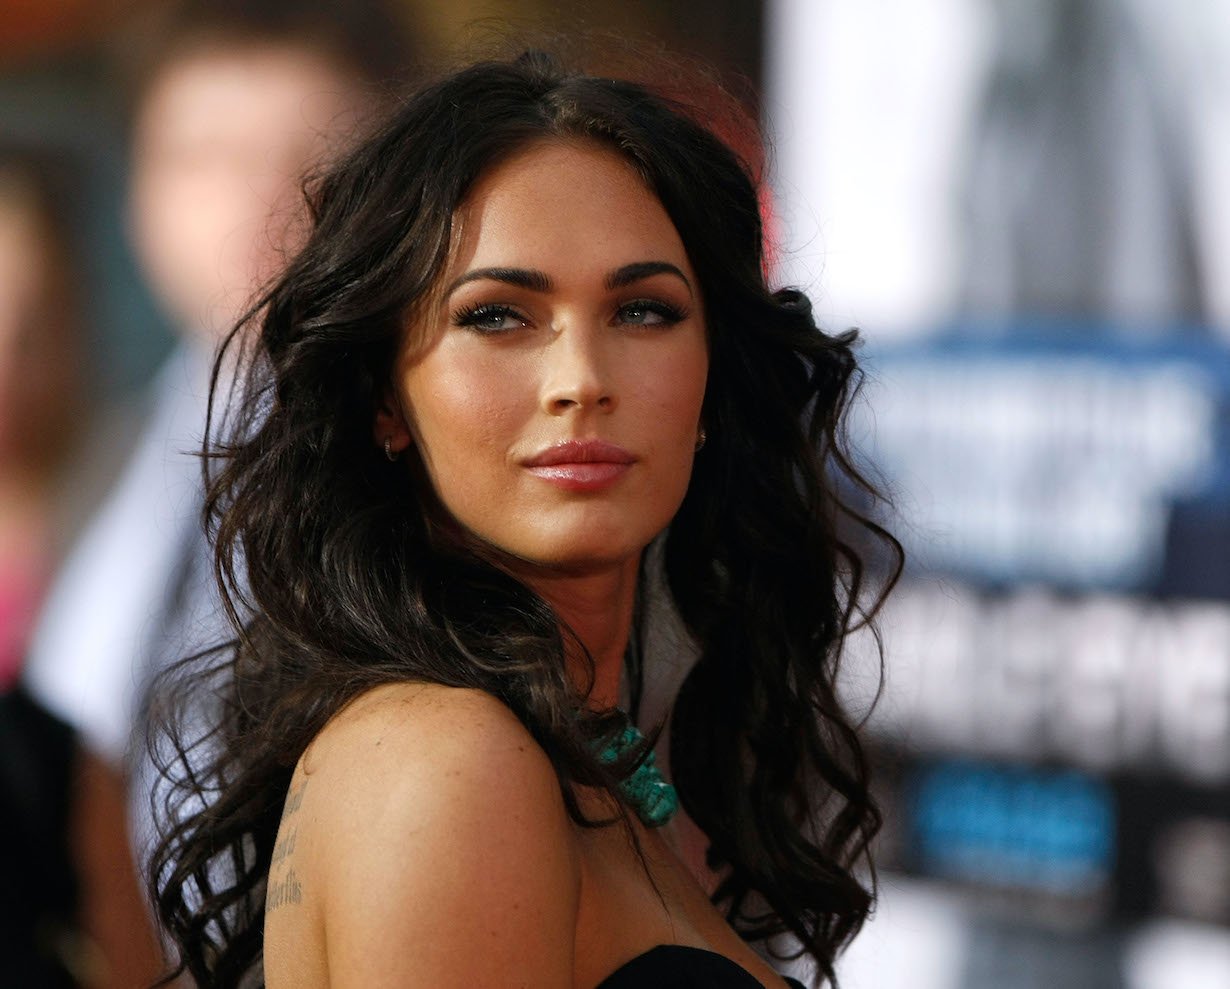 Megan Fox Transformers Porn Sex - Crew Members of 'Transformers' Once Wrote a Sexist Letter About Megan Fox,  Calling Her an 'Unfriendly B*tch'